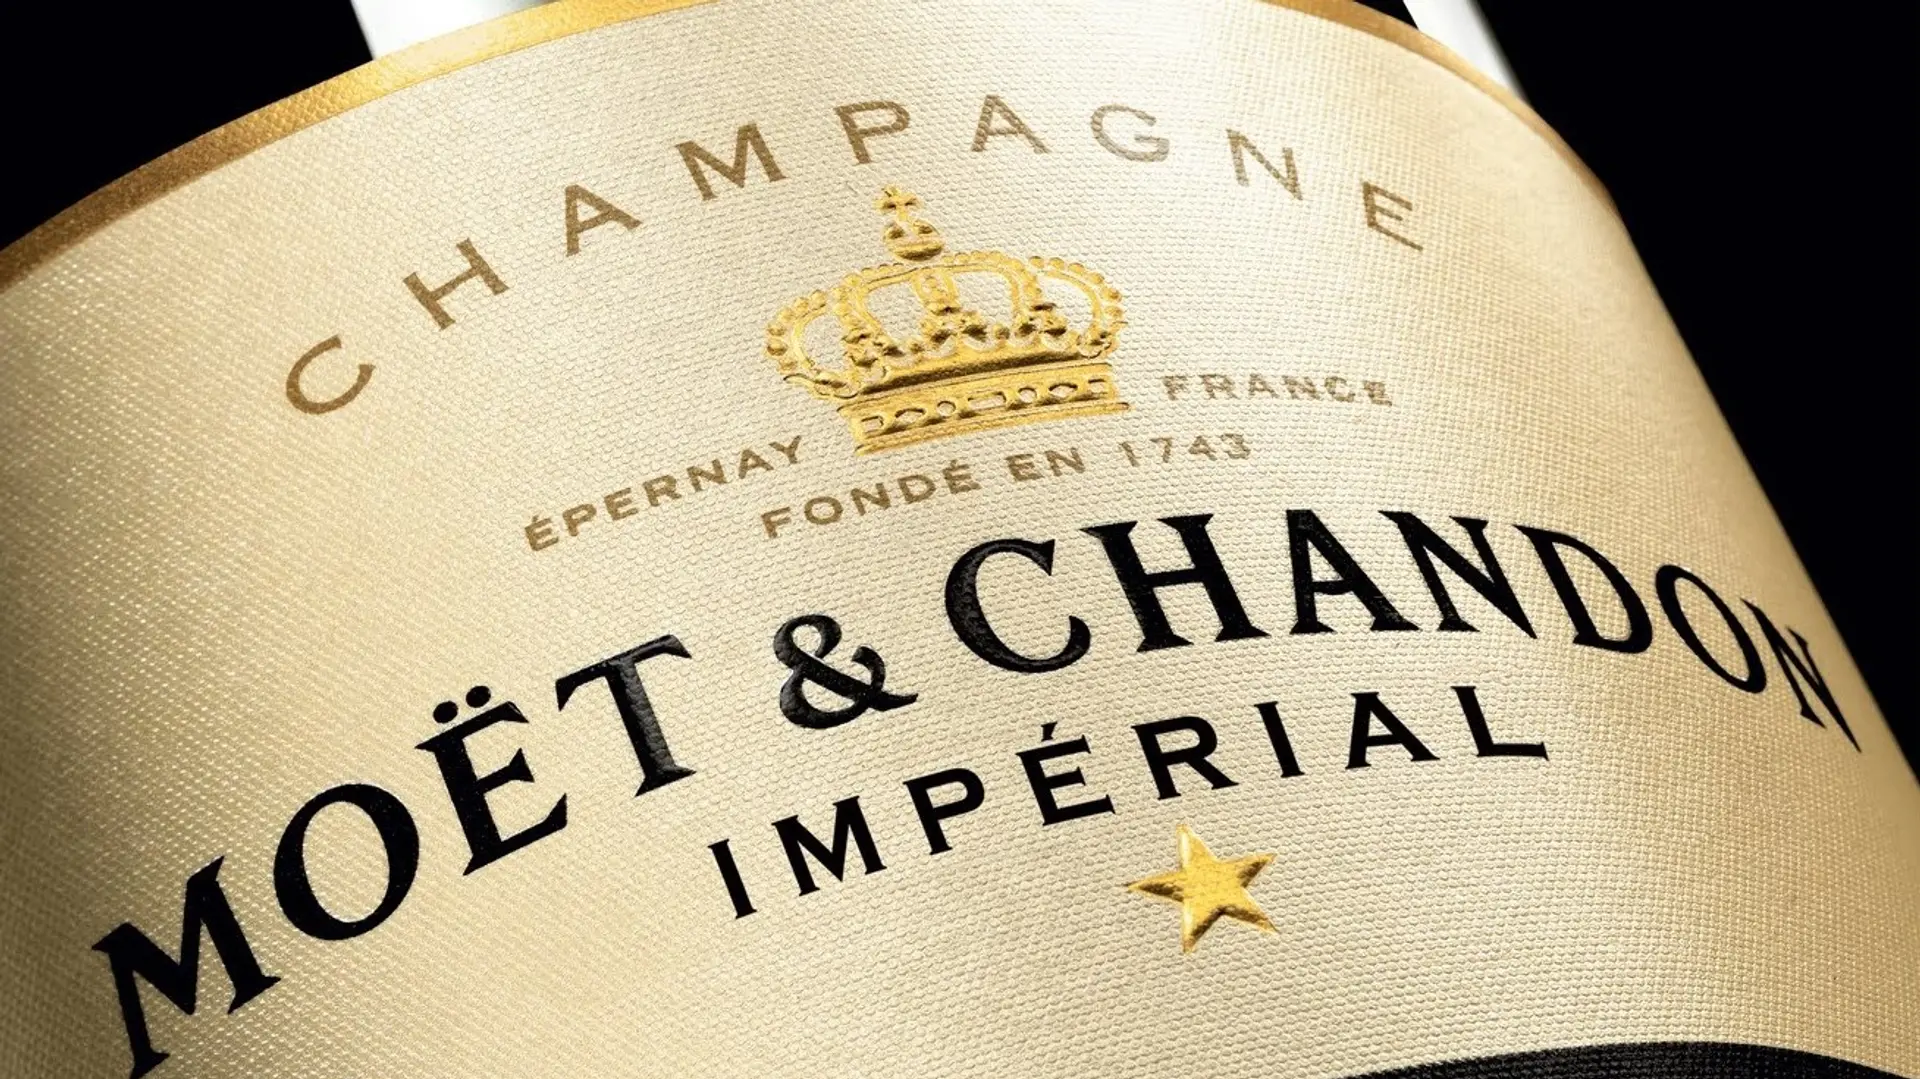 Airlines Toplists - 10 Best Business Class Champagnes & Sparkling Wines